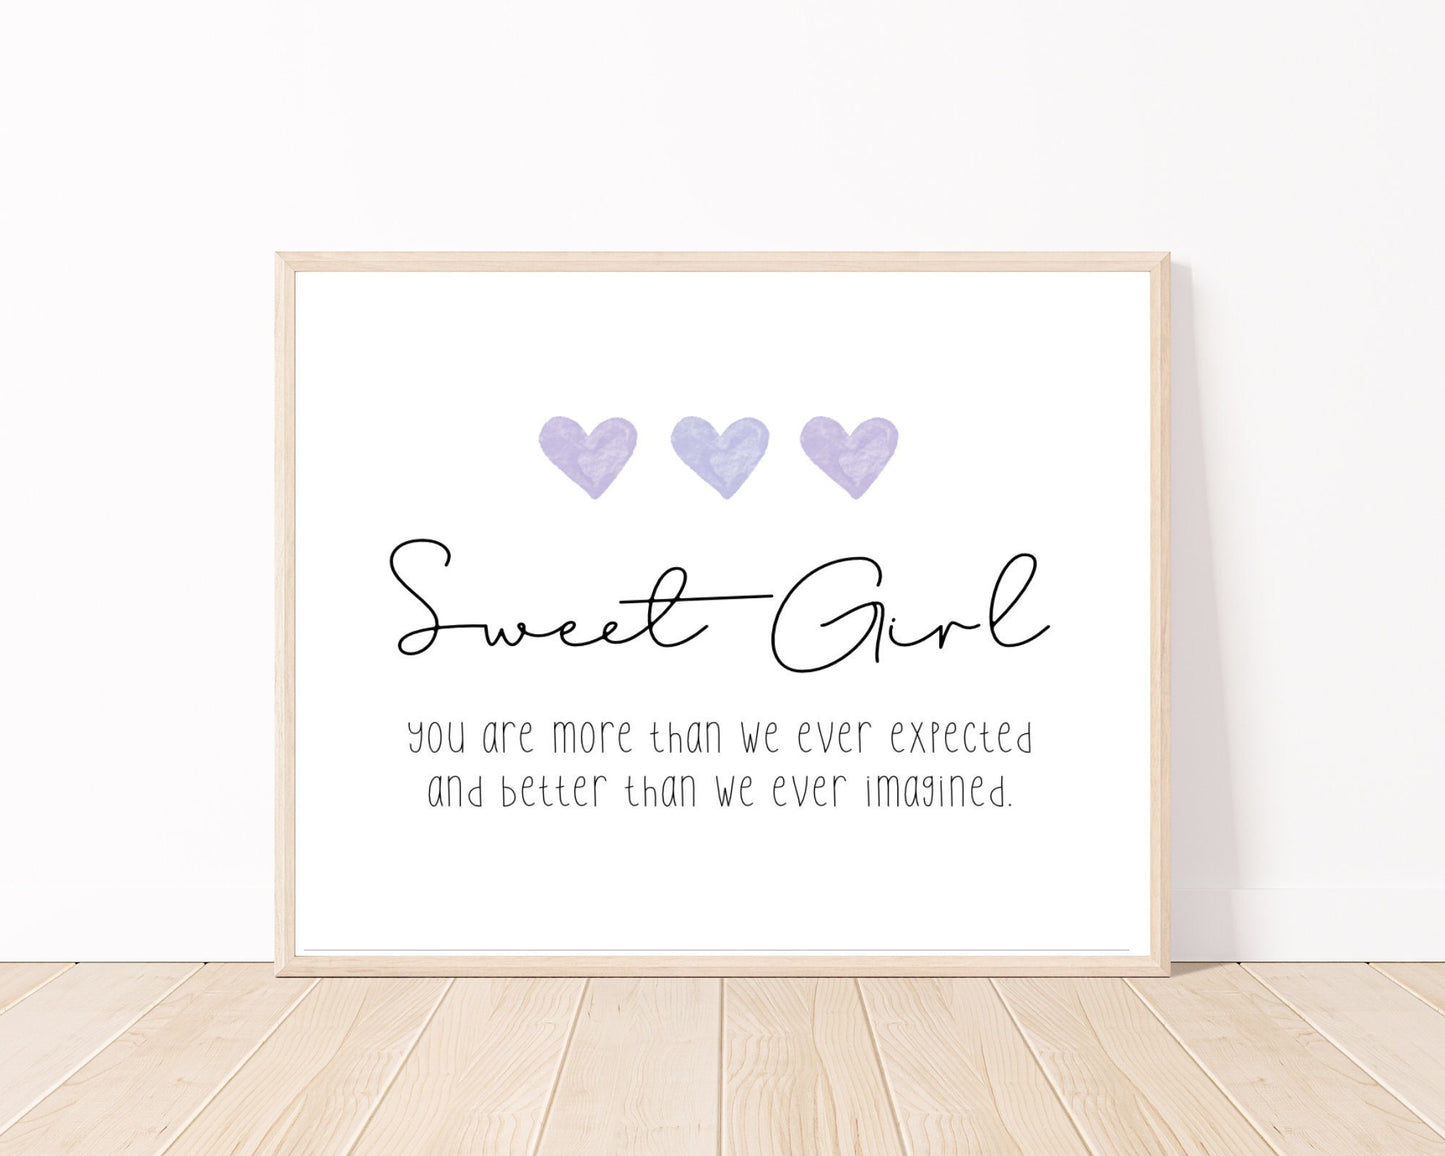 A little girl’s graphic showing three purple blue hearts with a piece of writing below that says: Sweet girl, you are more than we ever expected, and better than we ever imagined.